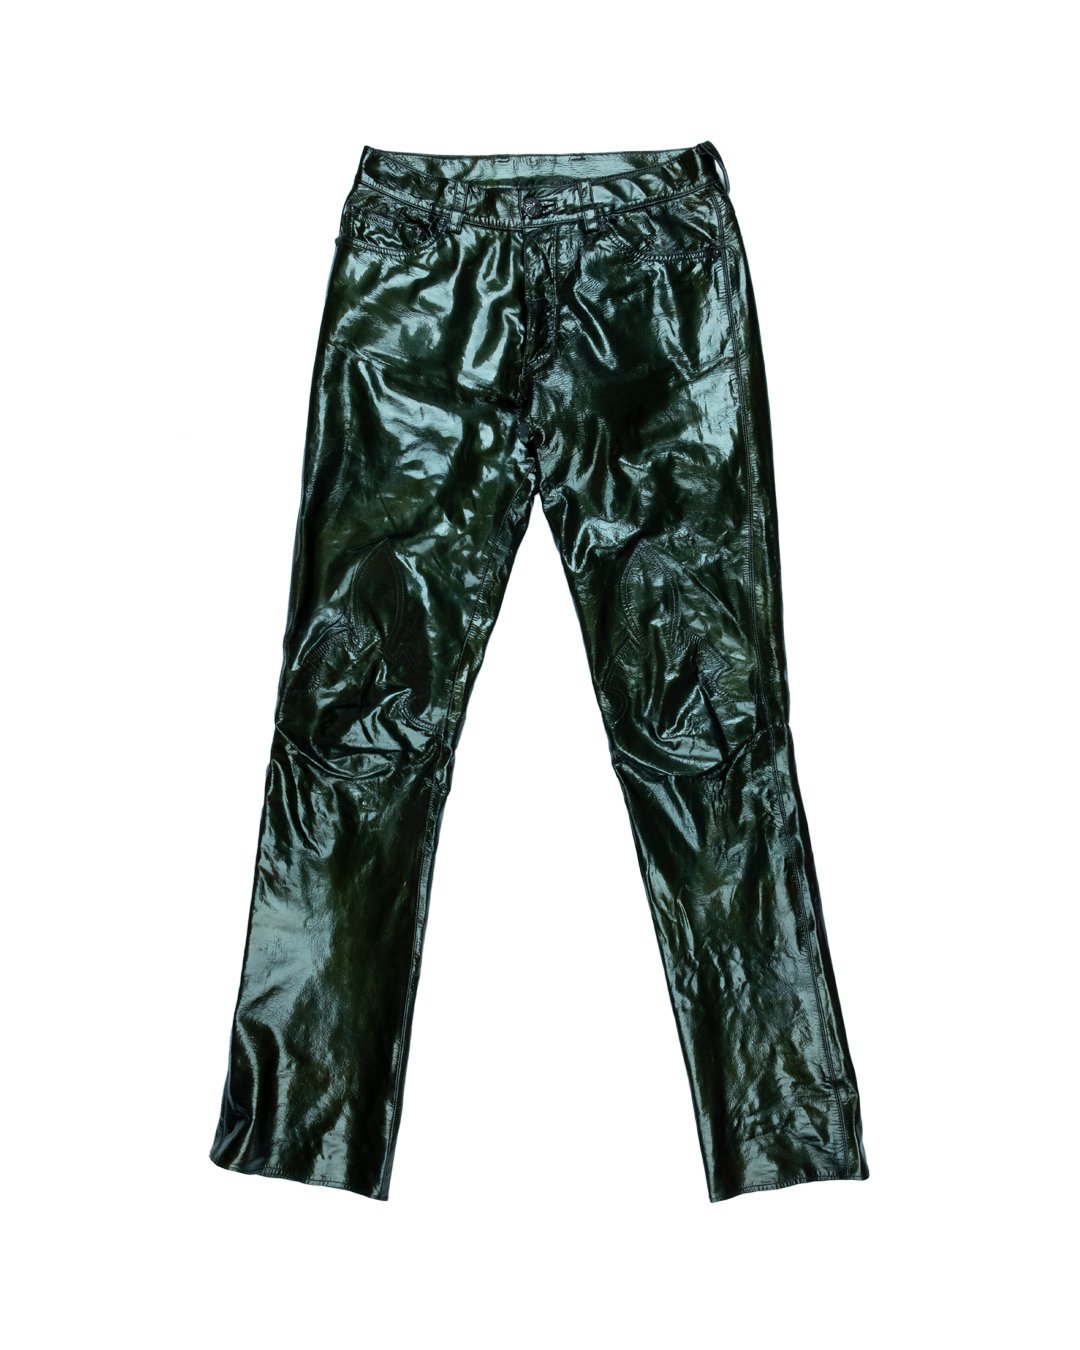 Chrome Hearts 1990s 1 of 1 Sample Five-Patch Olive Leather Pants ...